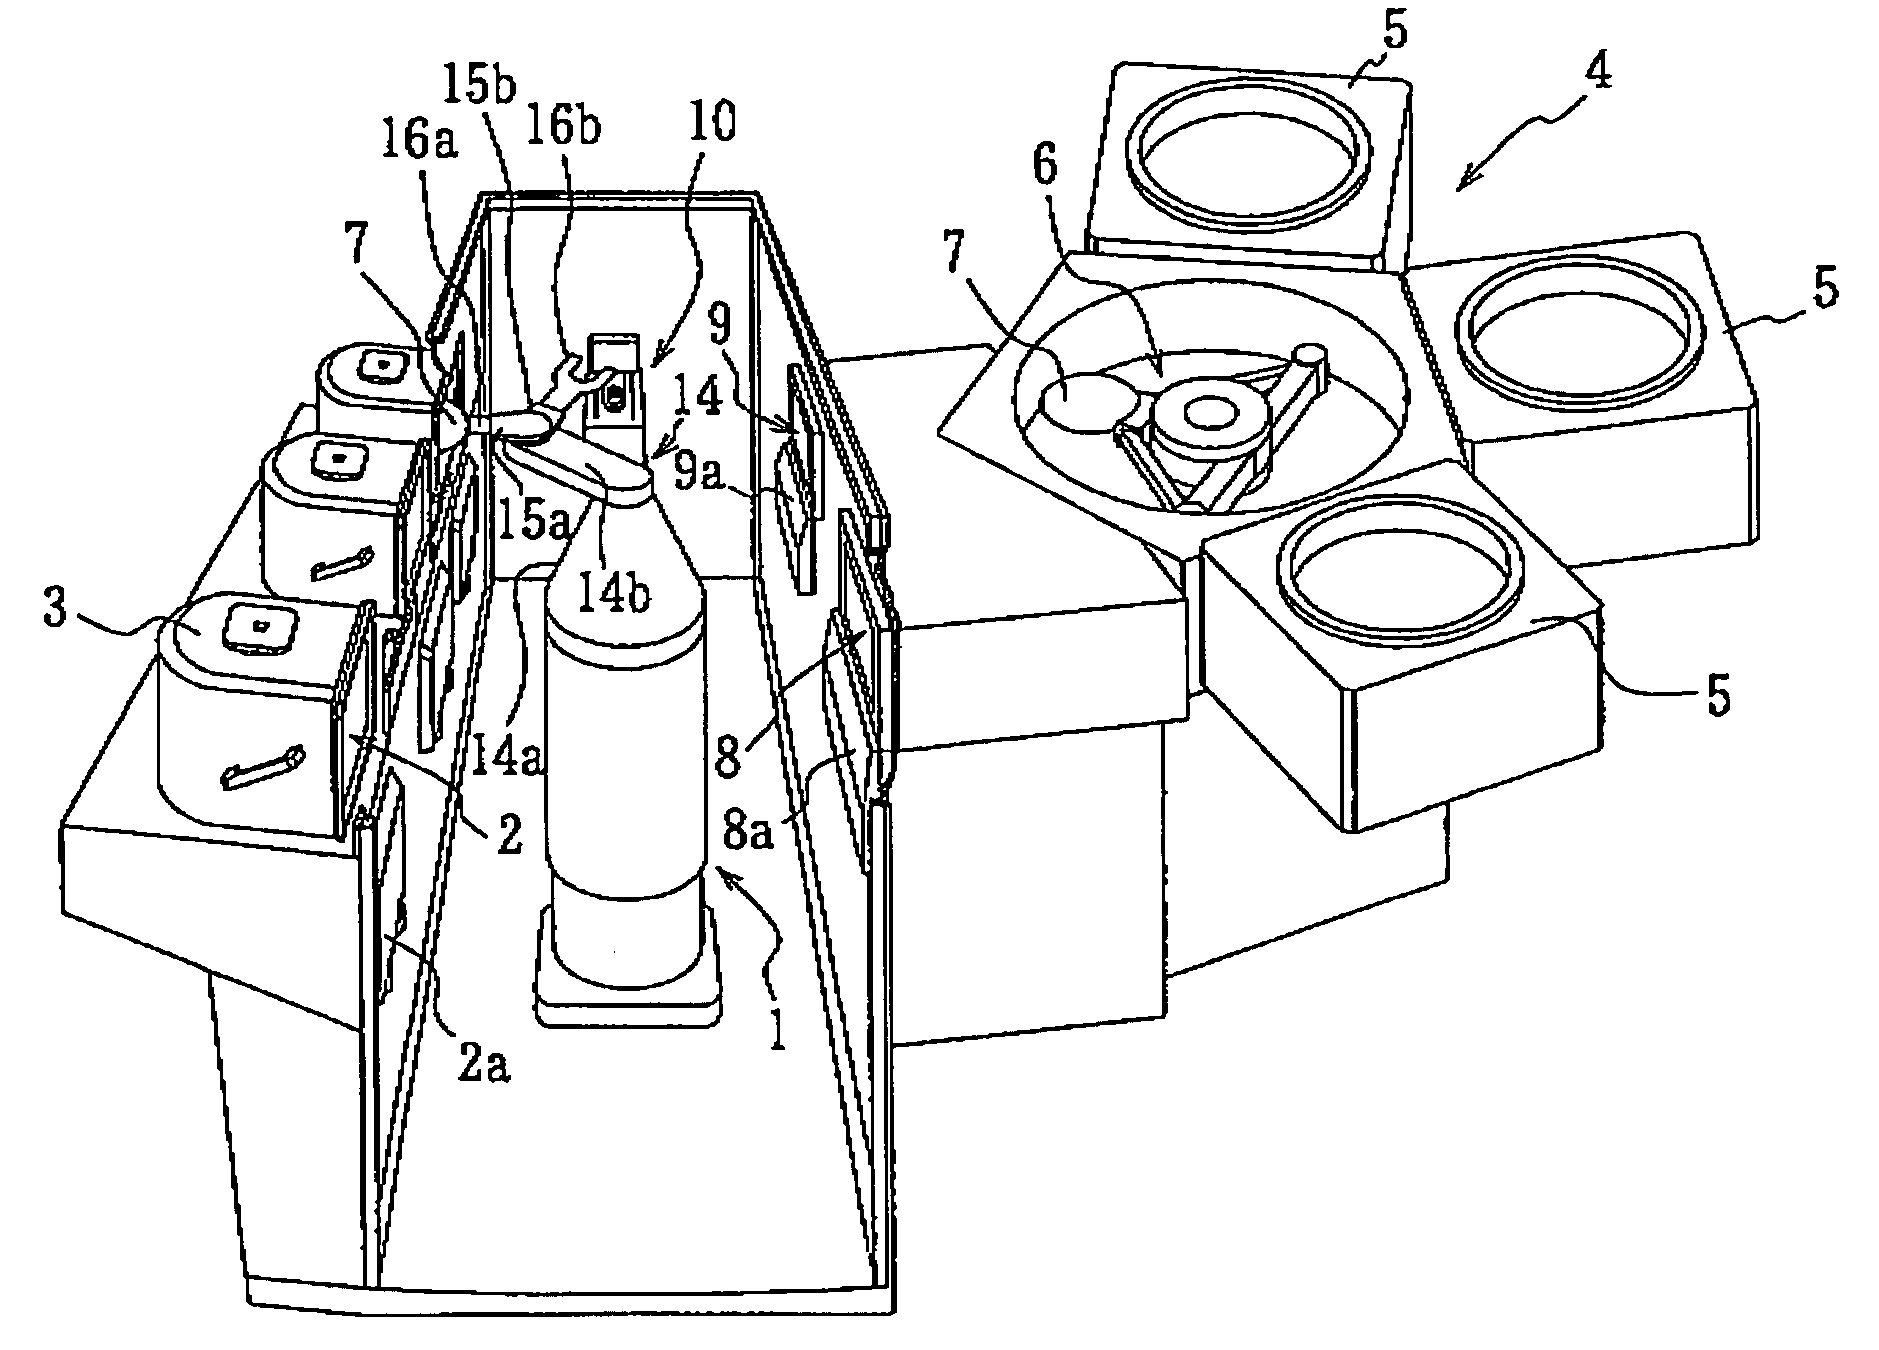 Scalar type robot for carrying flat plate-like object, and flat plate-like object processing system